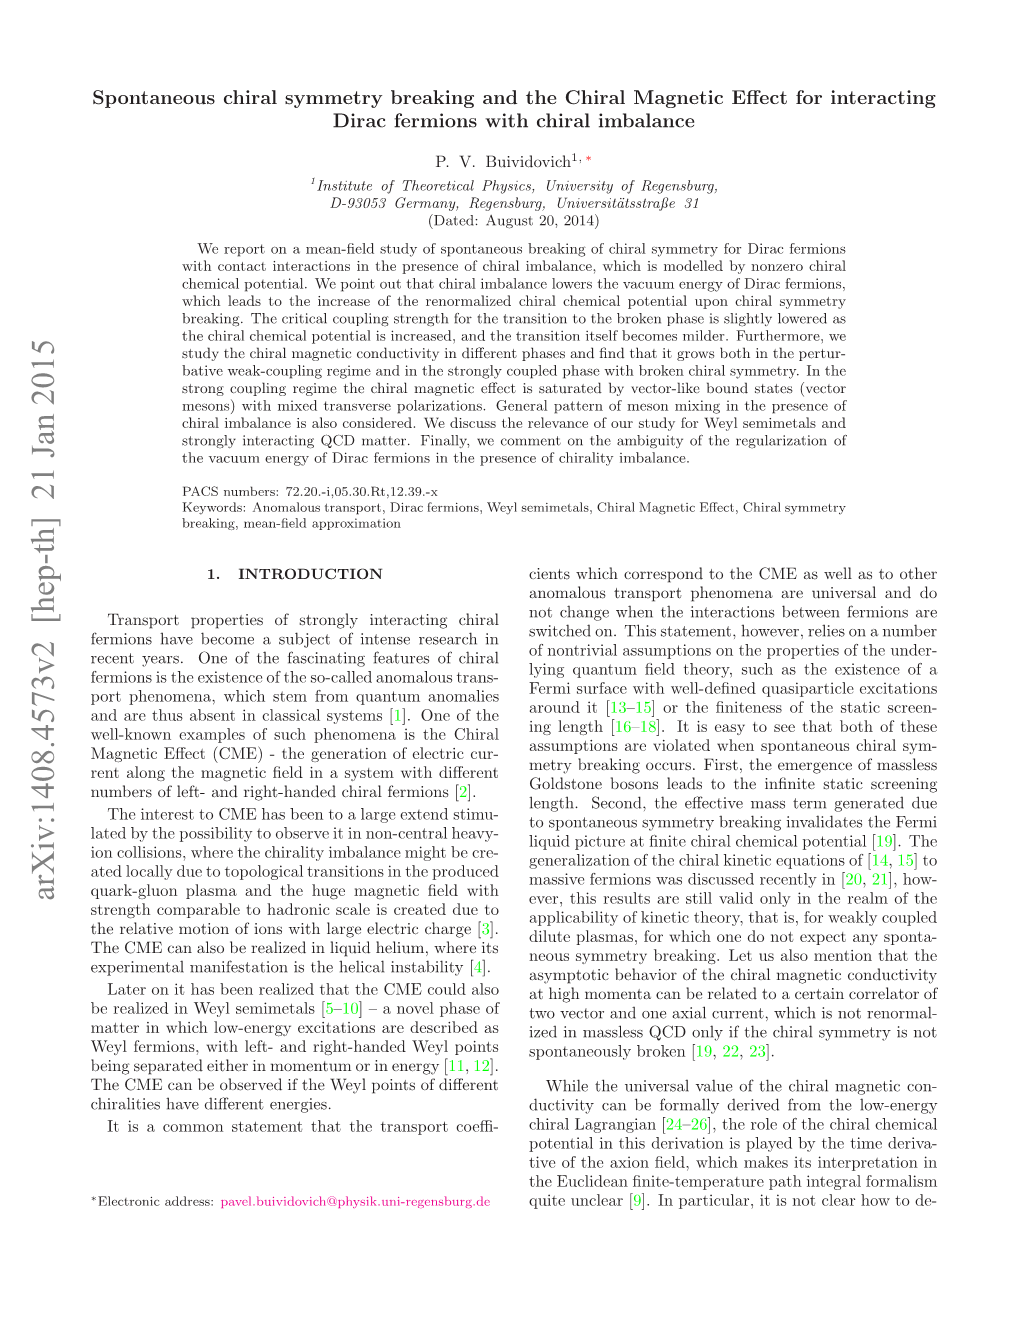 Spontaneous Chiral Symmetry Breaking and the Chiral Magnetic